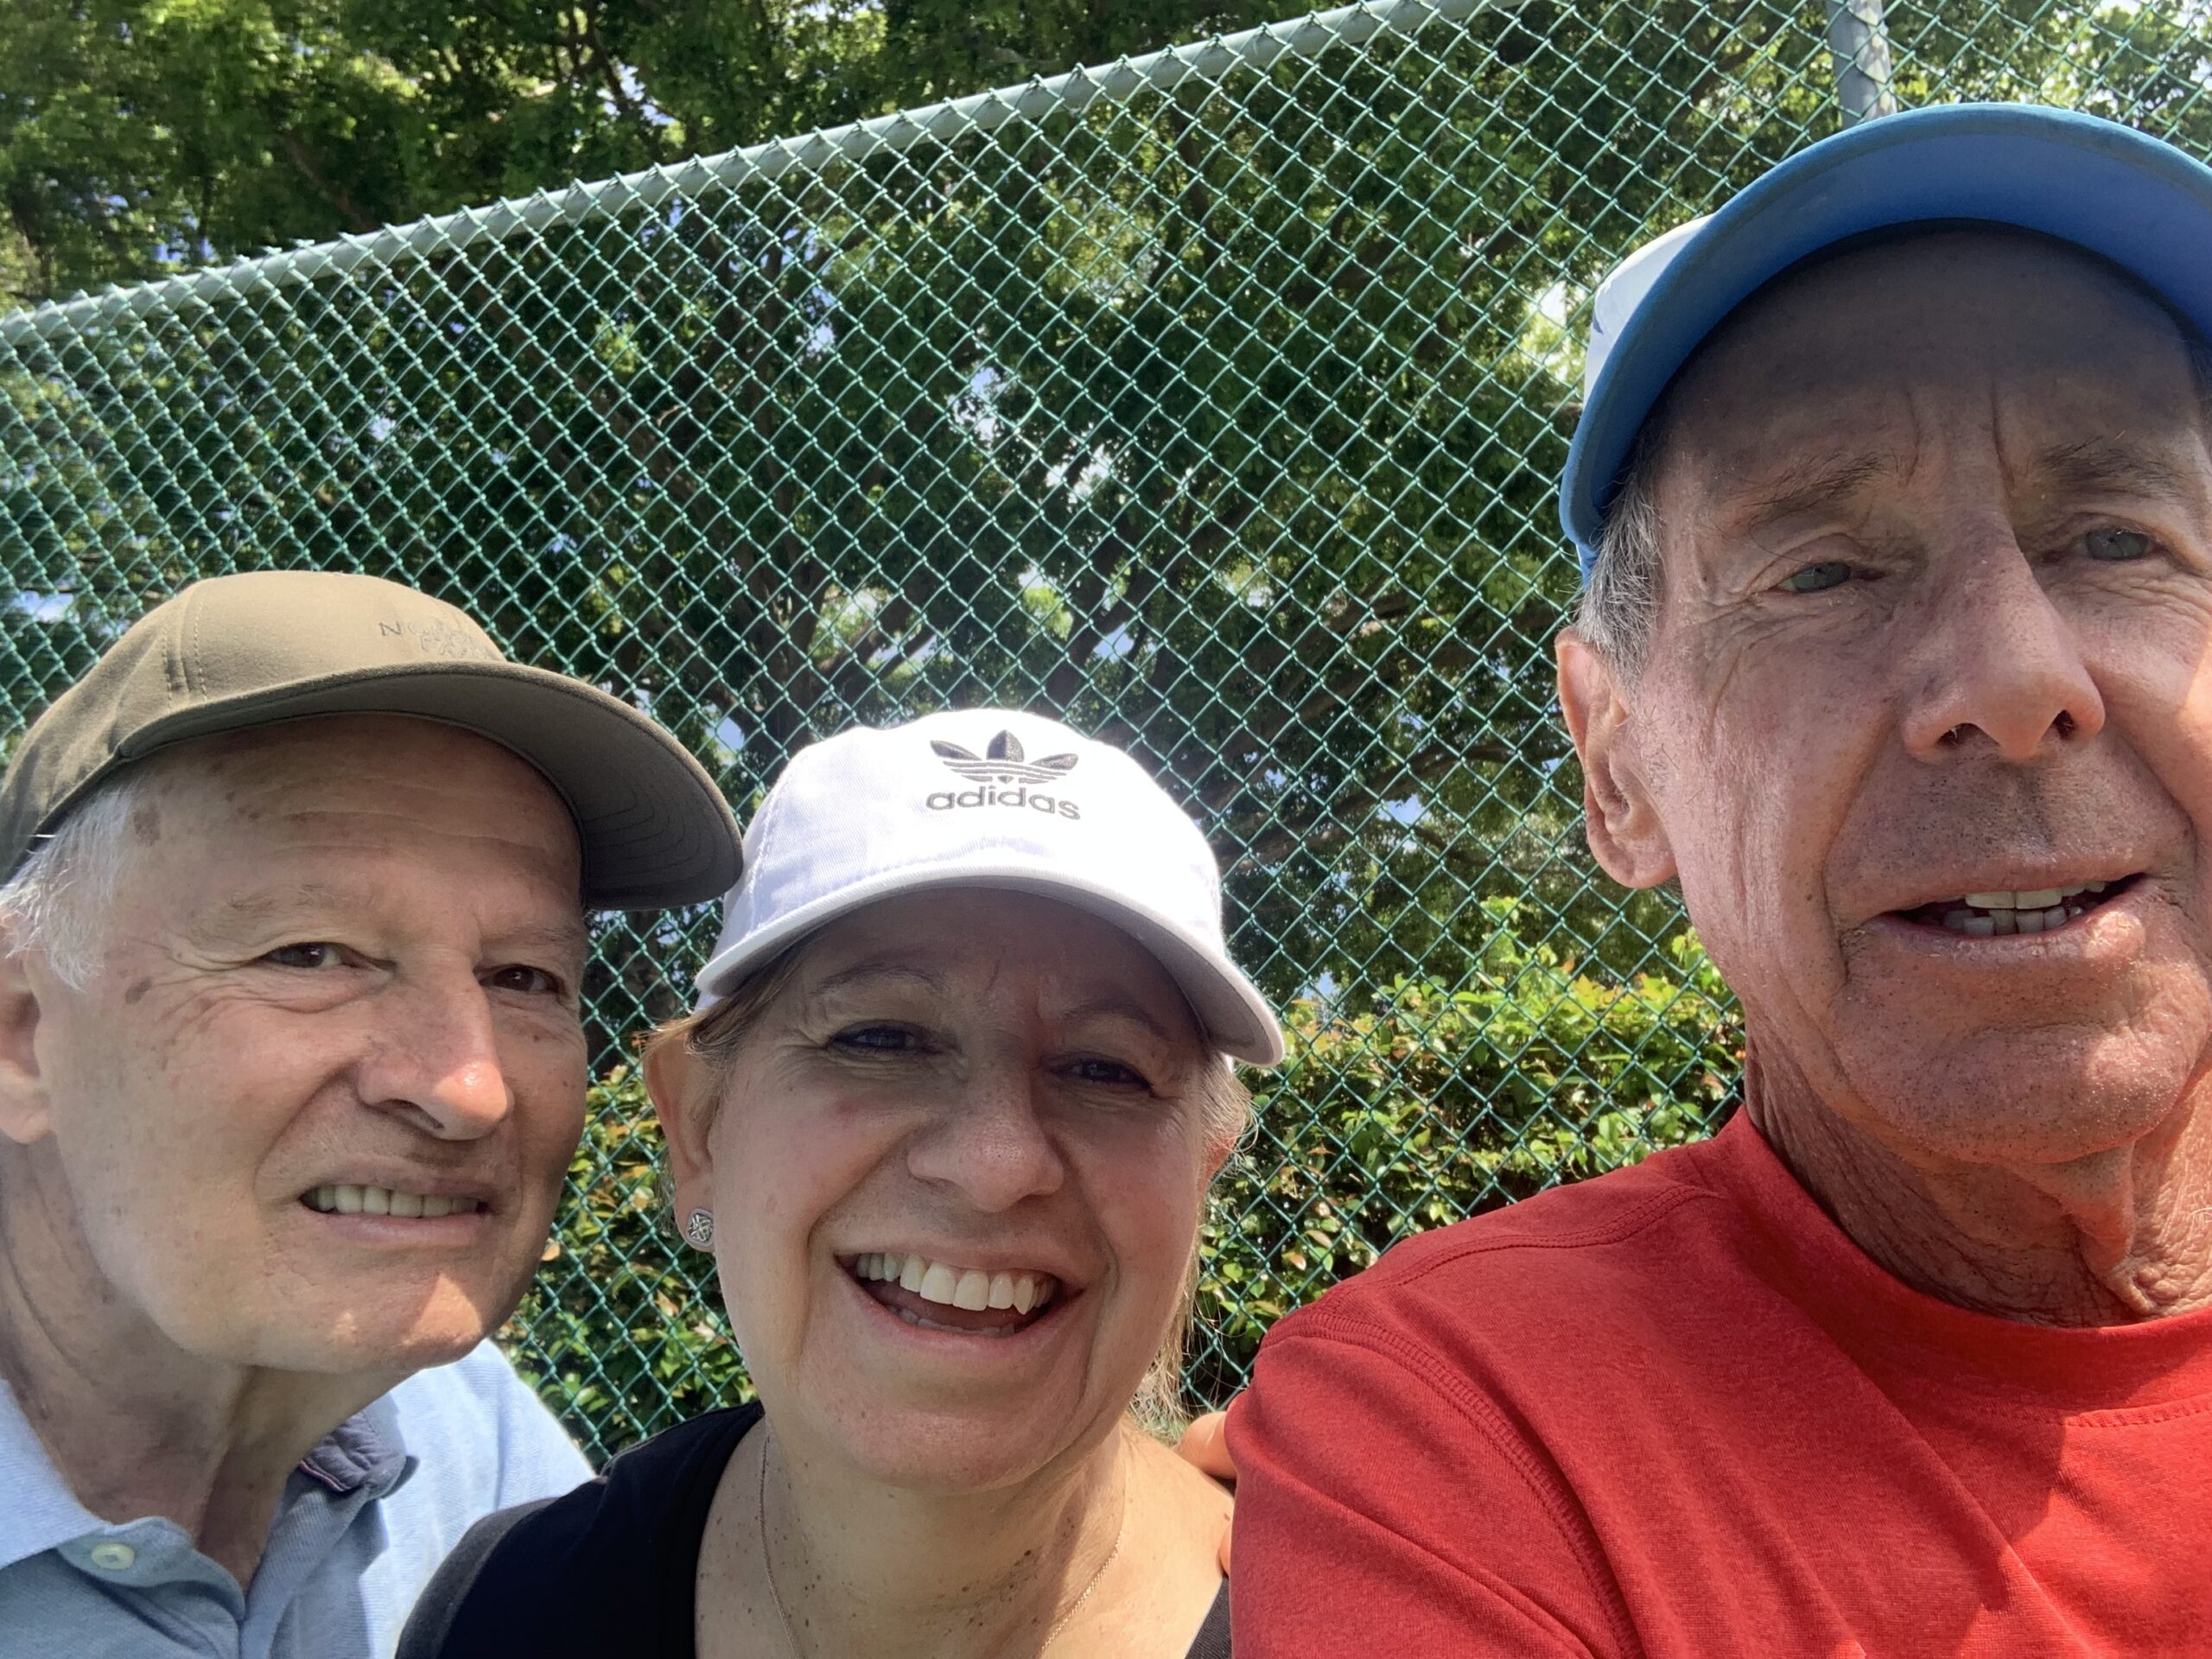 Bob with Luci and Enzo after a beginners' pickleball clinic in Delray Beach, FL